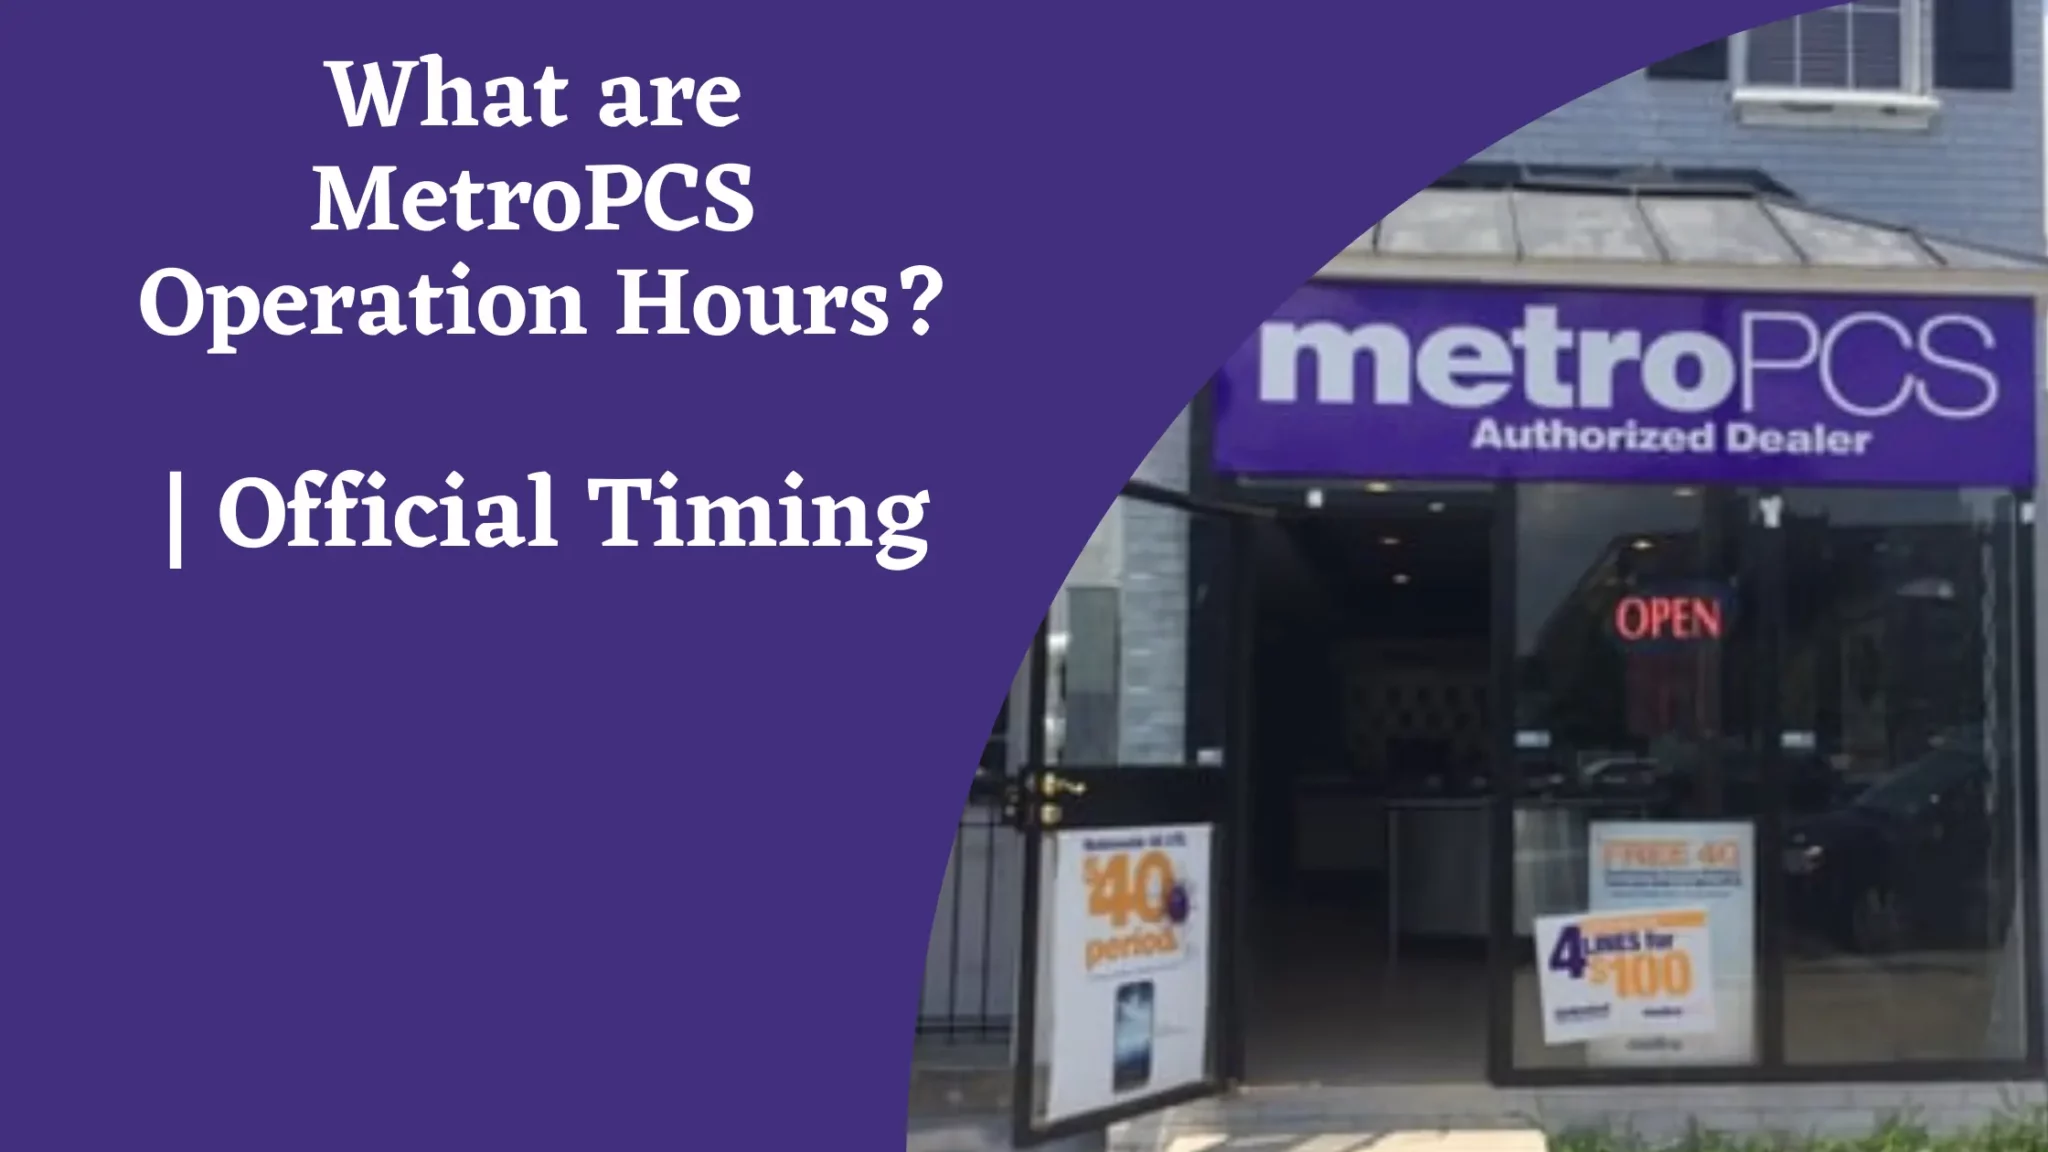 What are MetroPCS Operation Hours?